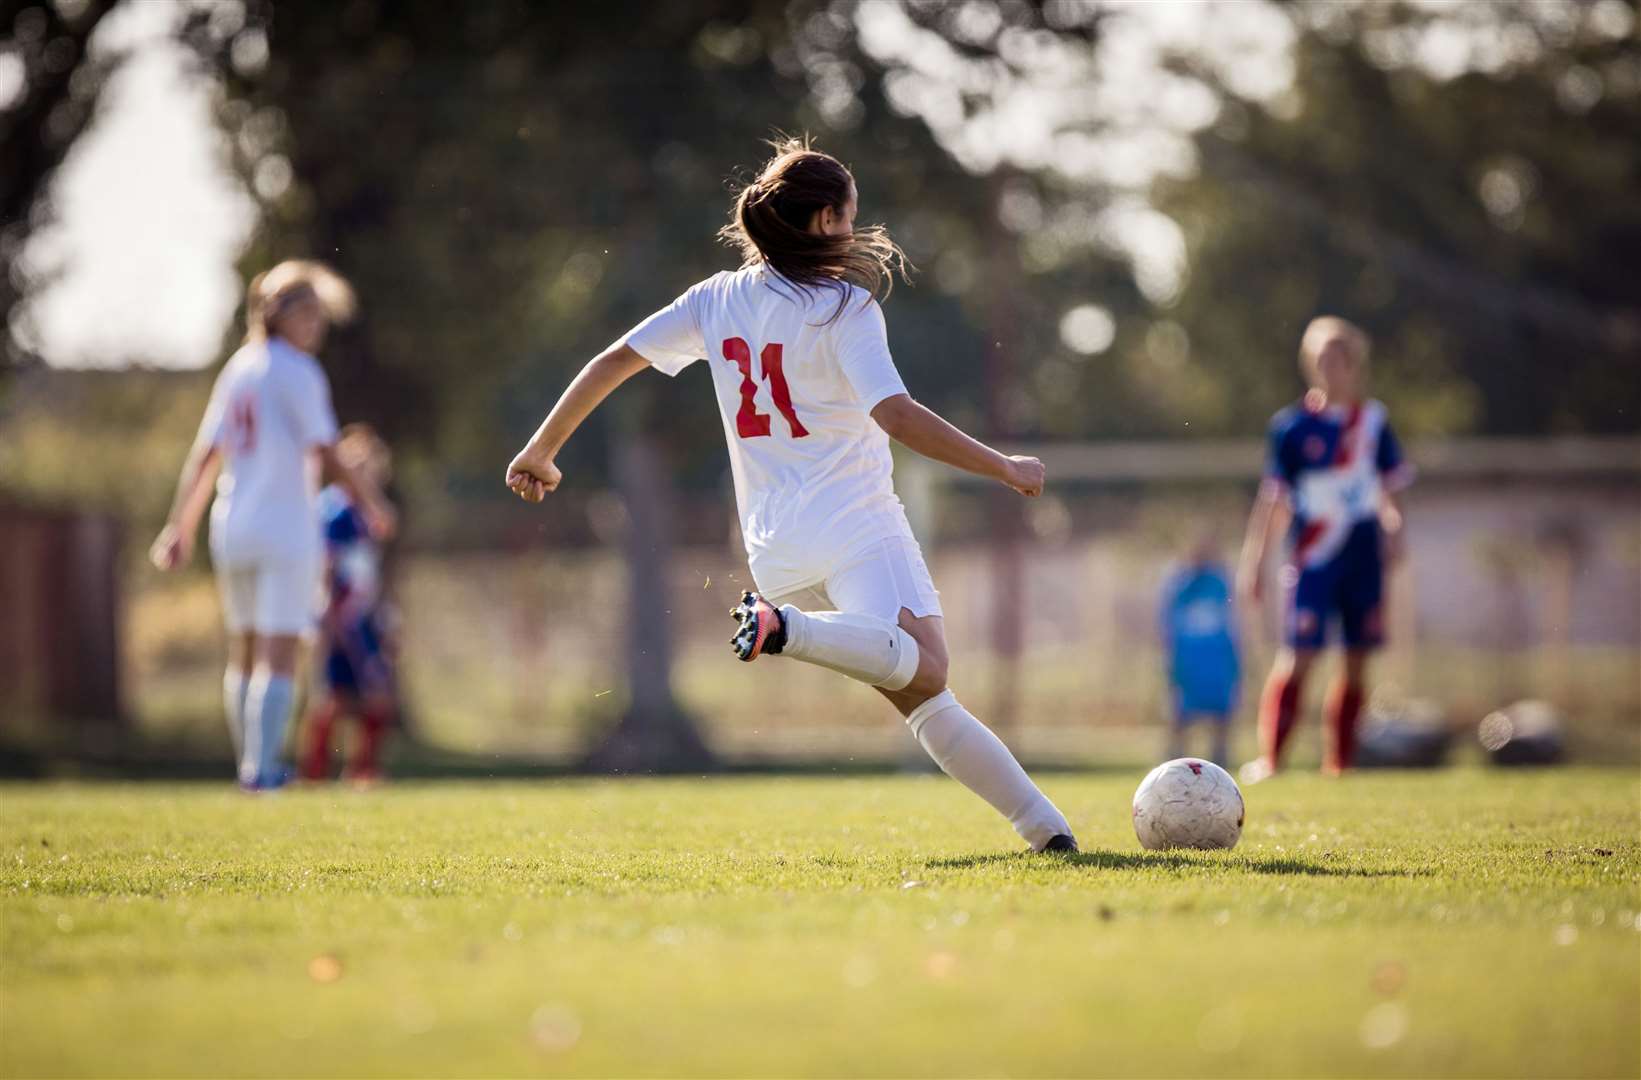 How much have attitudes to women’s football changed? Image: iStock.